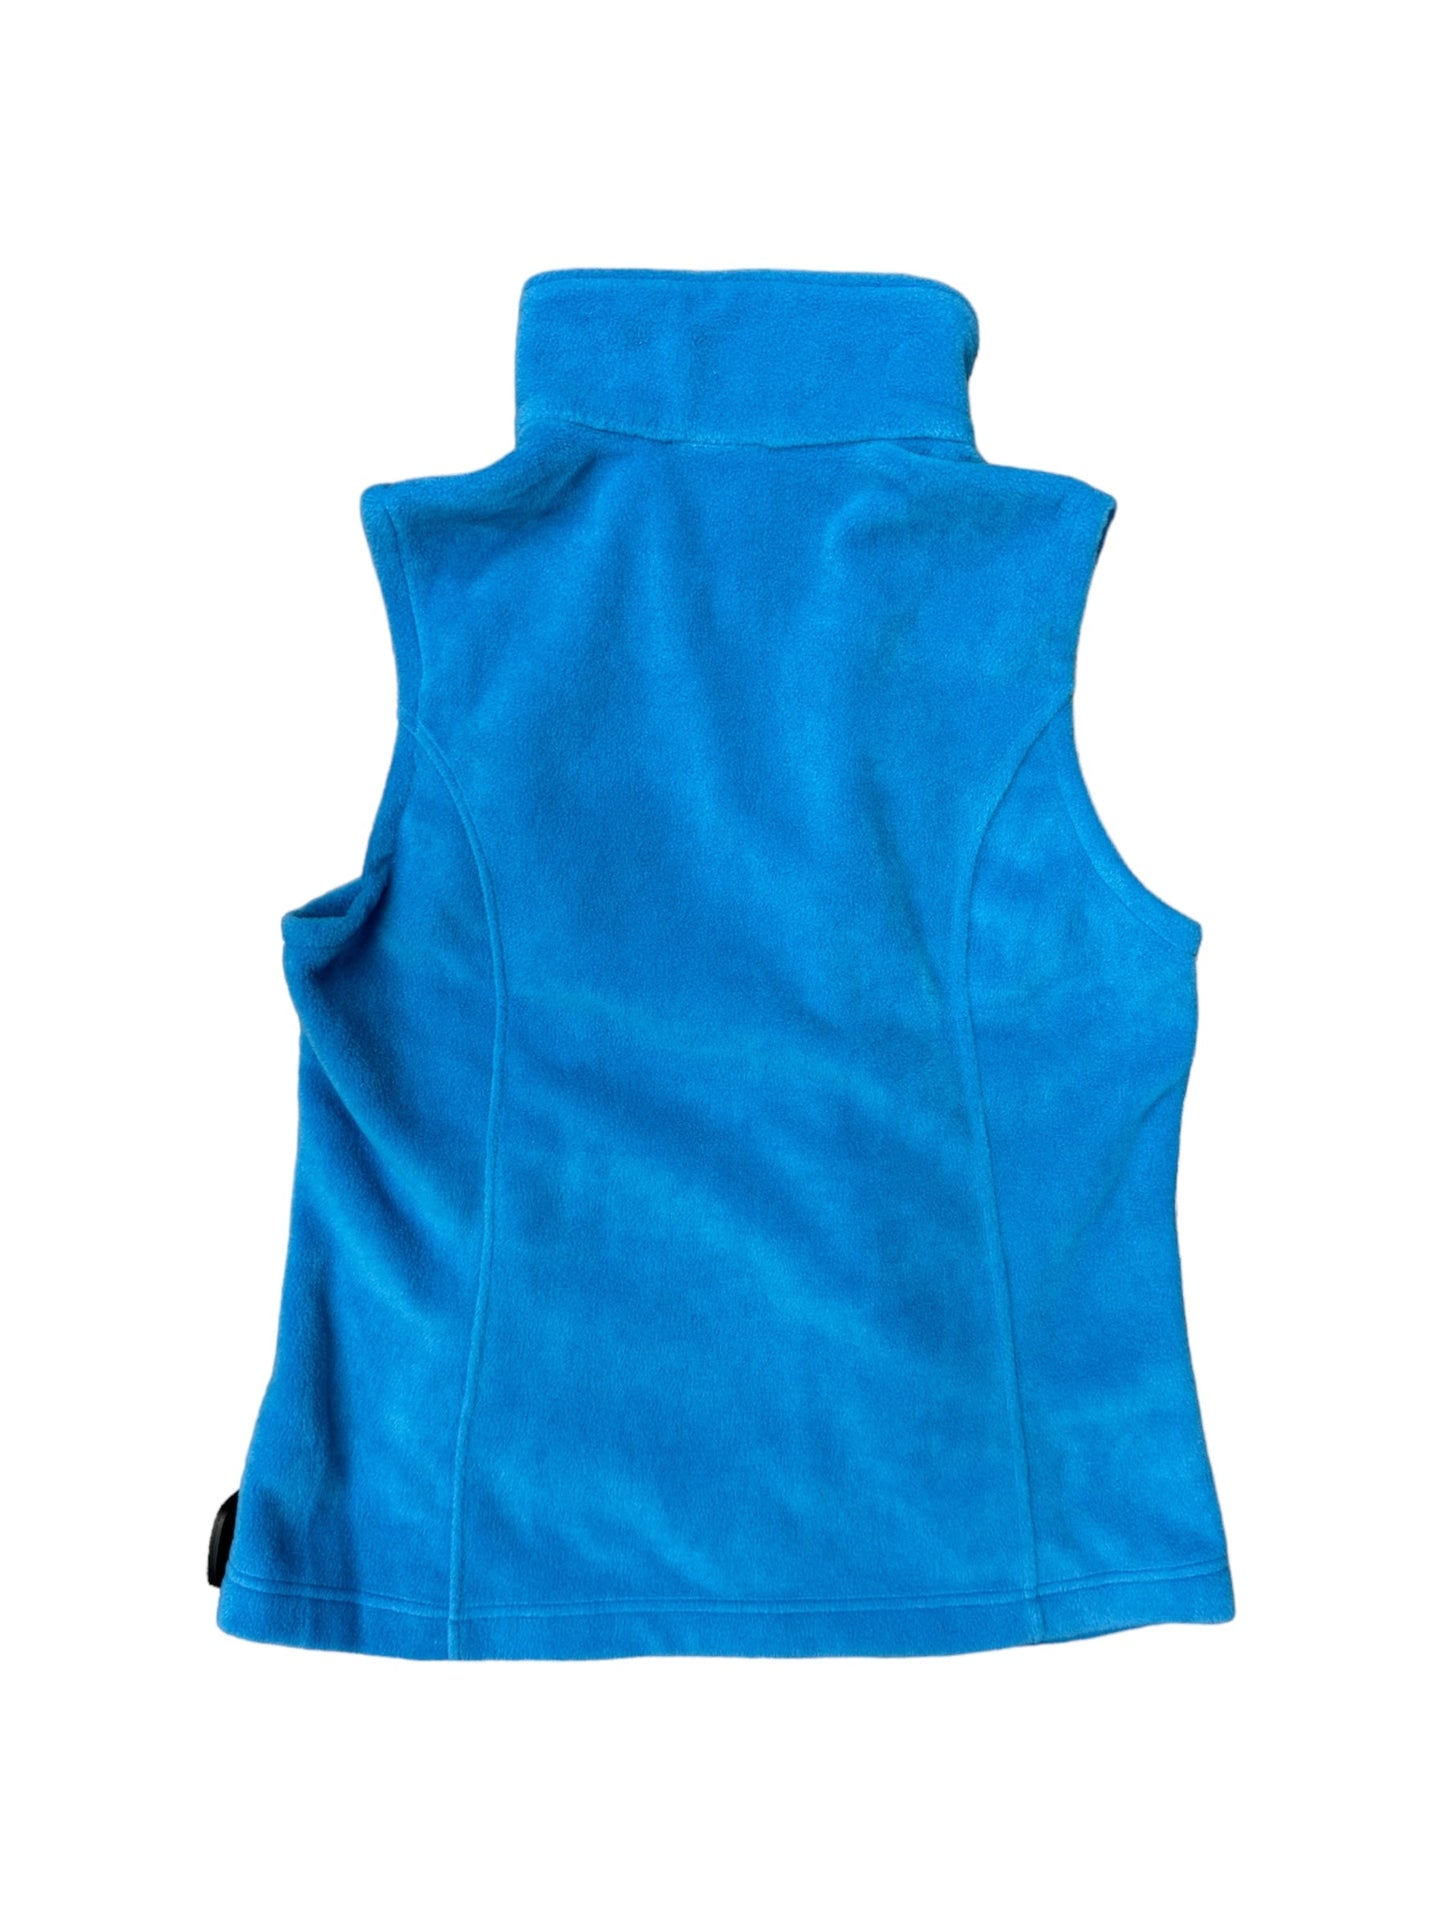 Blue Vest Other Columbia, Size M